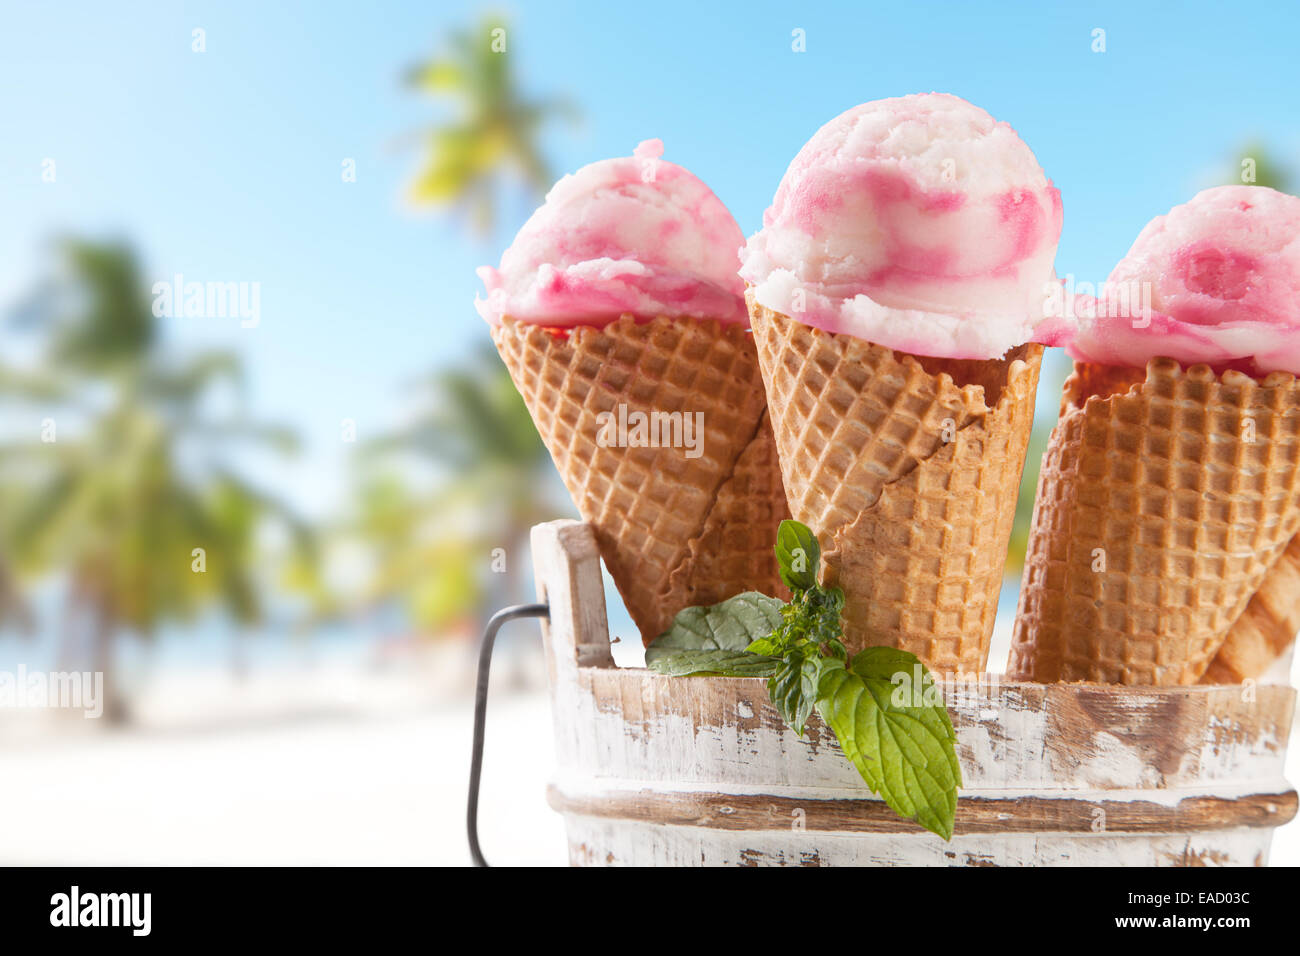 Fruit ice cream with blur beach as background. Served on wooden planks Stock Photo